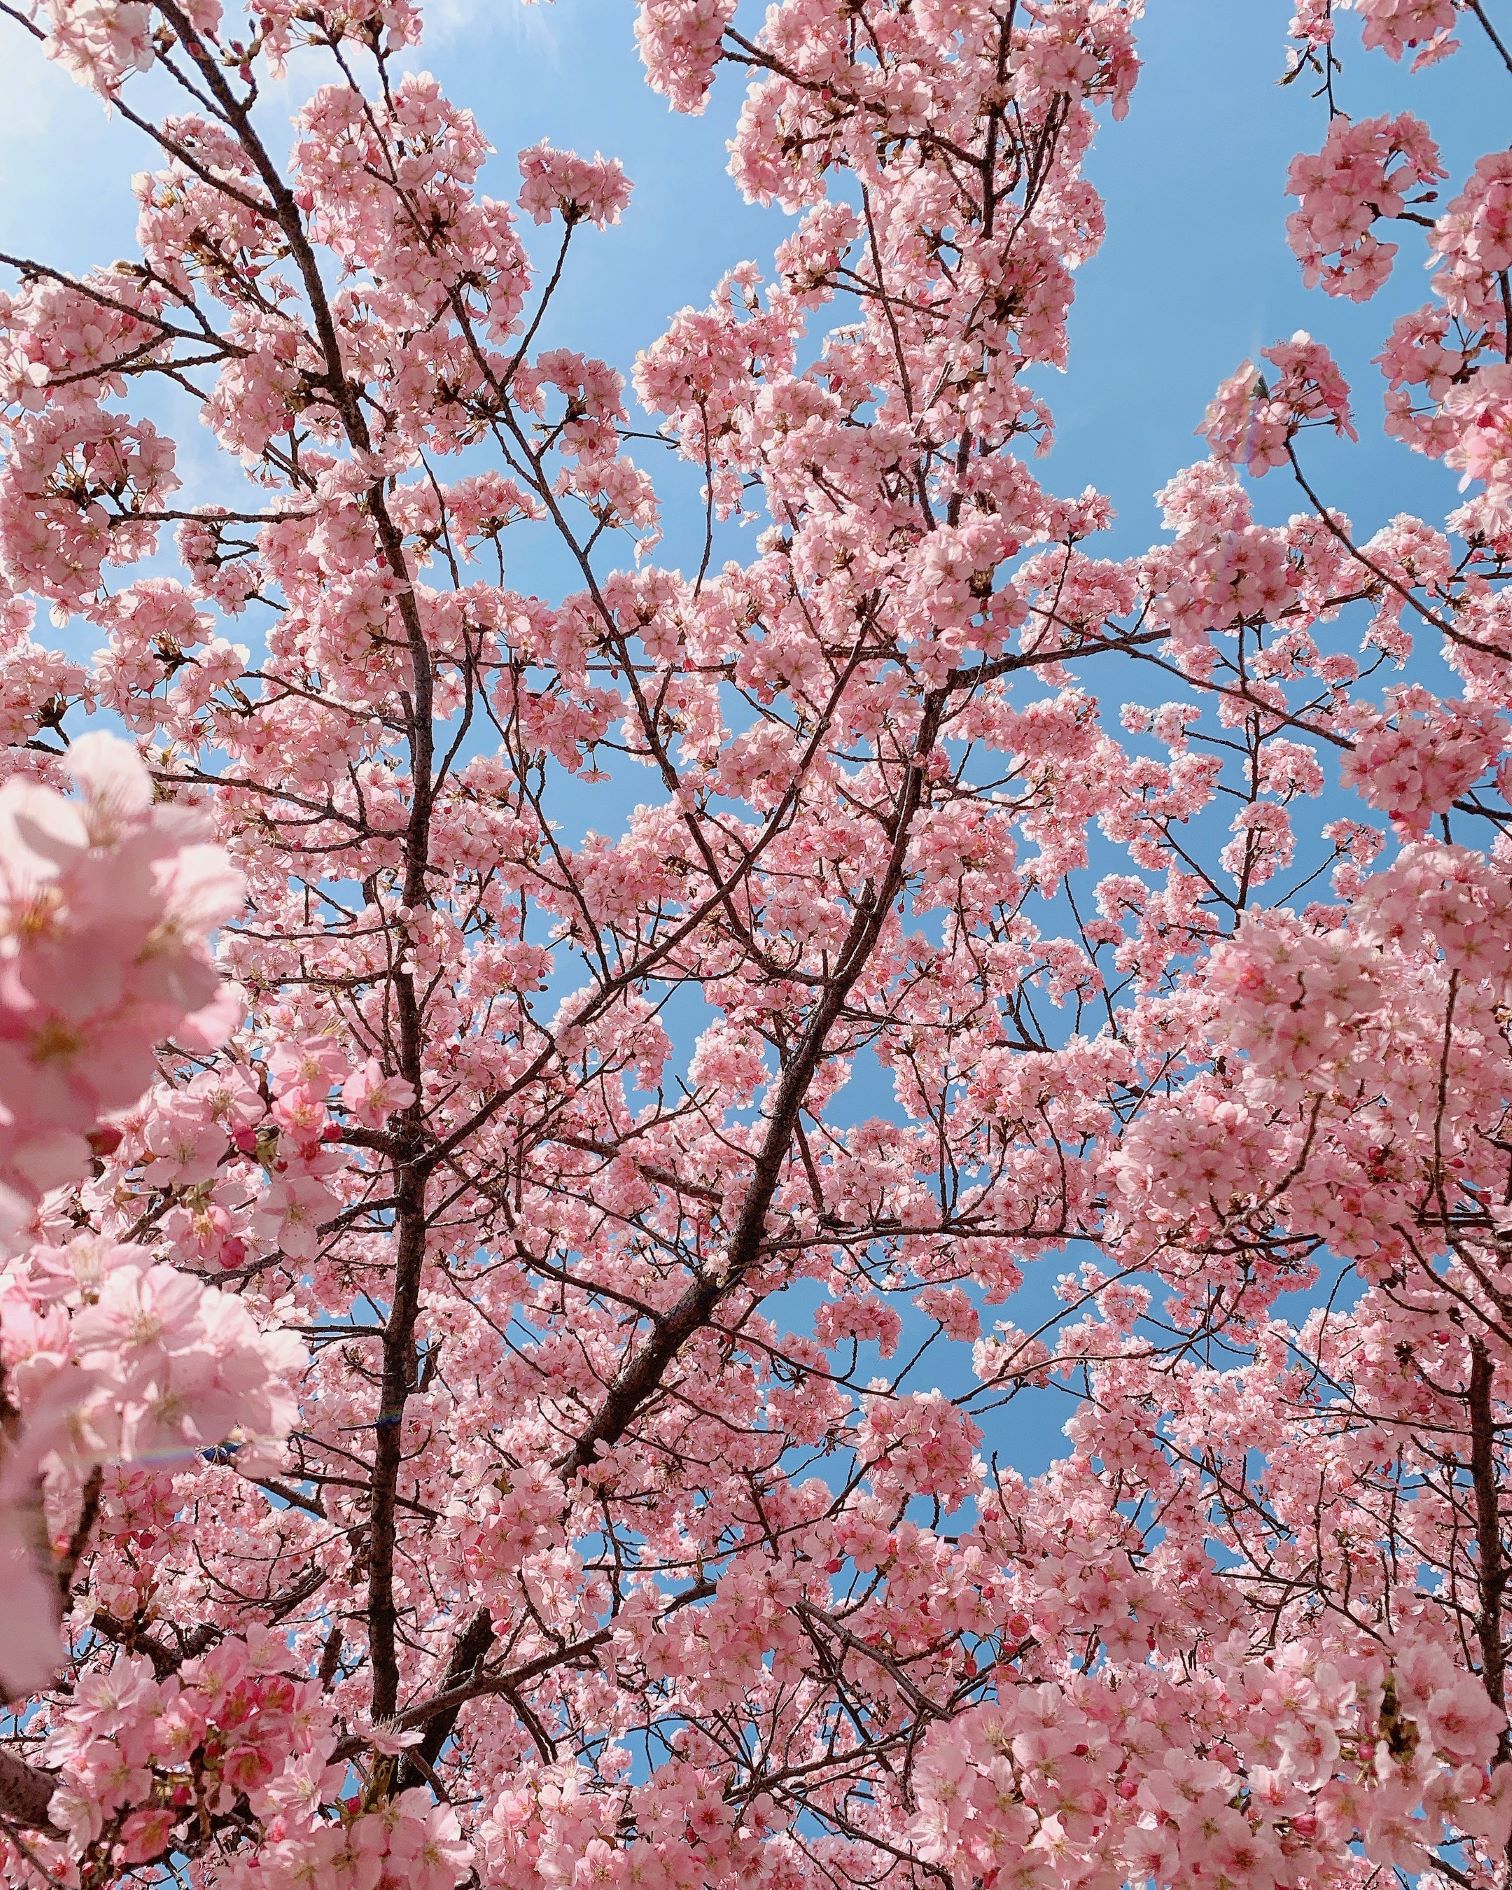 Pink cherry blossoms in full bloom against blue sky